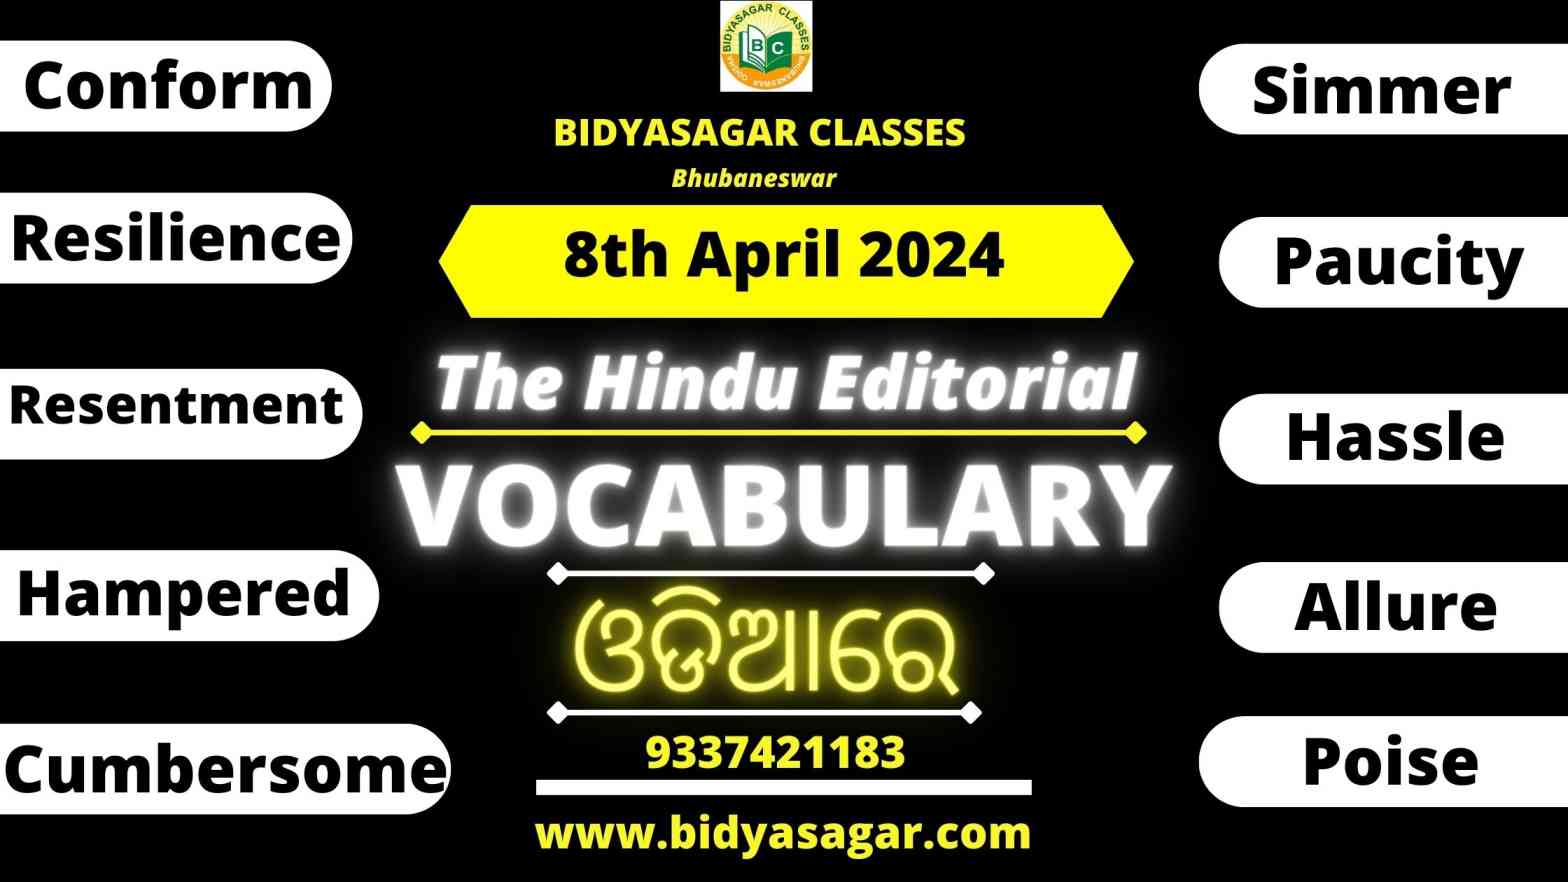 The Hindu Editorial Vocabulary of 8th April 2024